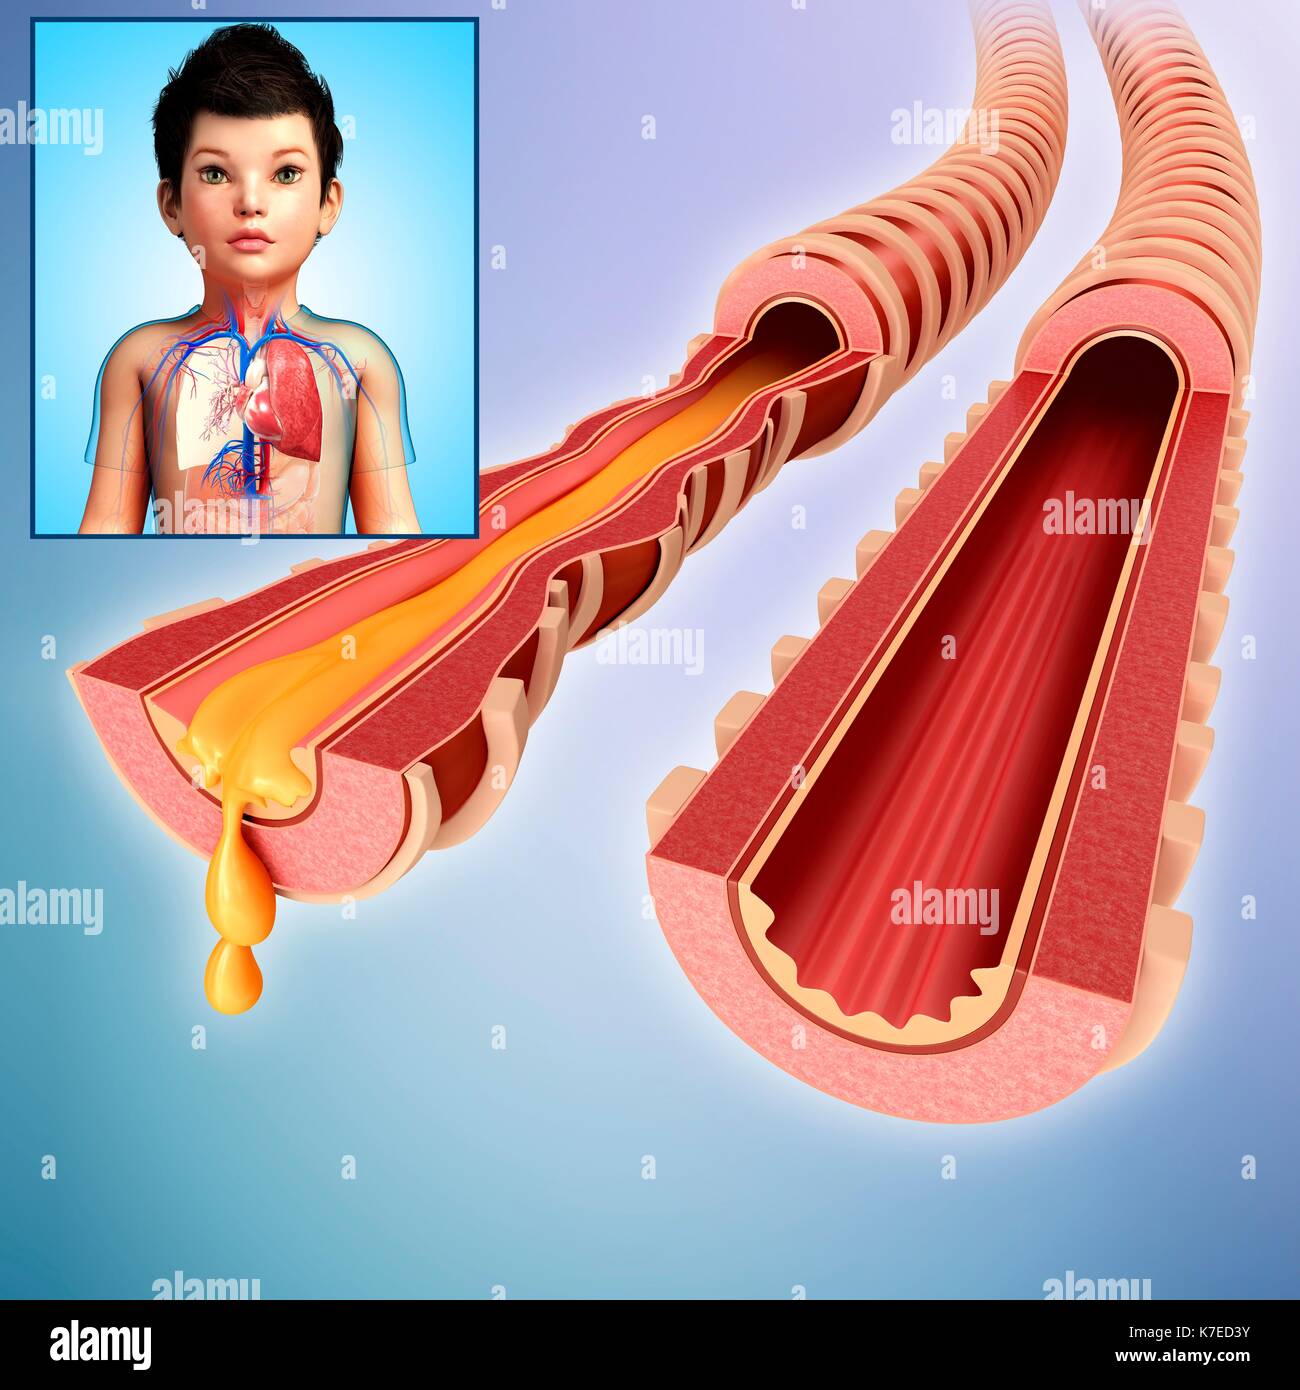 Illustration of a child's infected and normal bronchi. Stock Photo